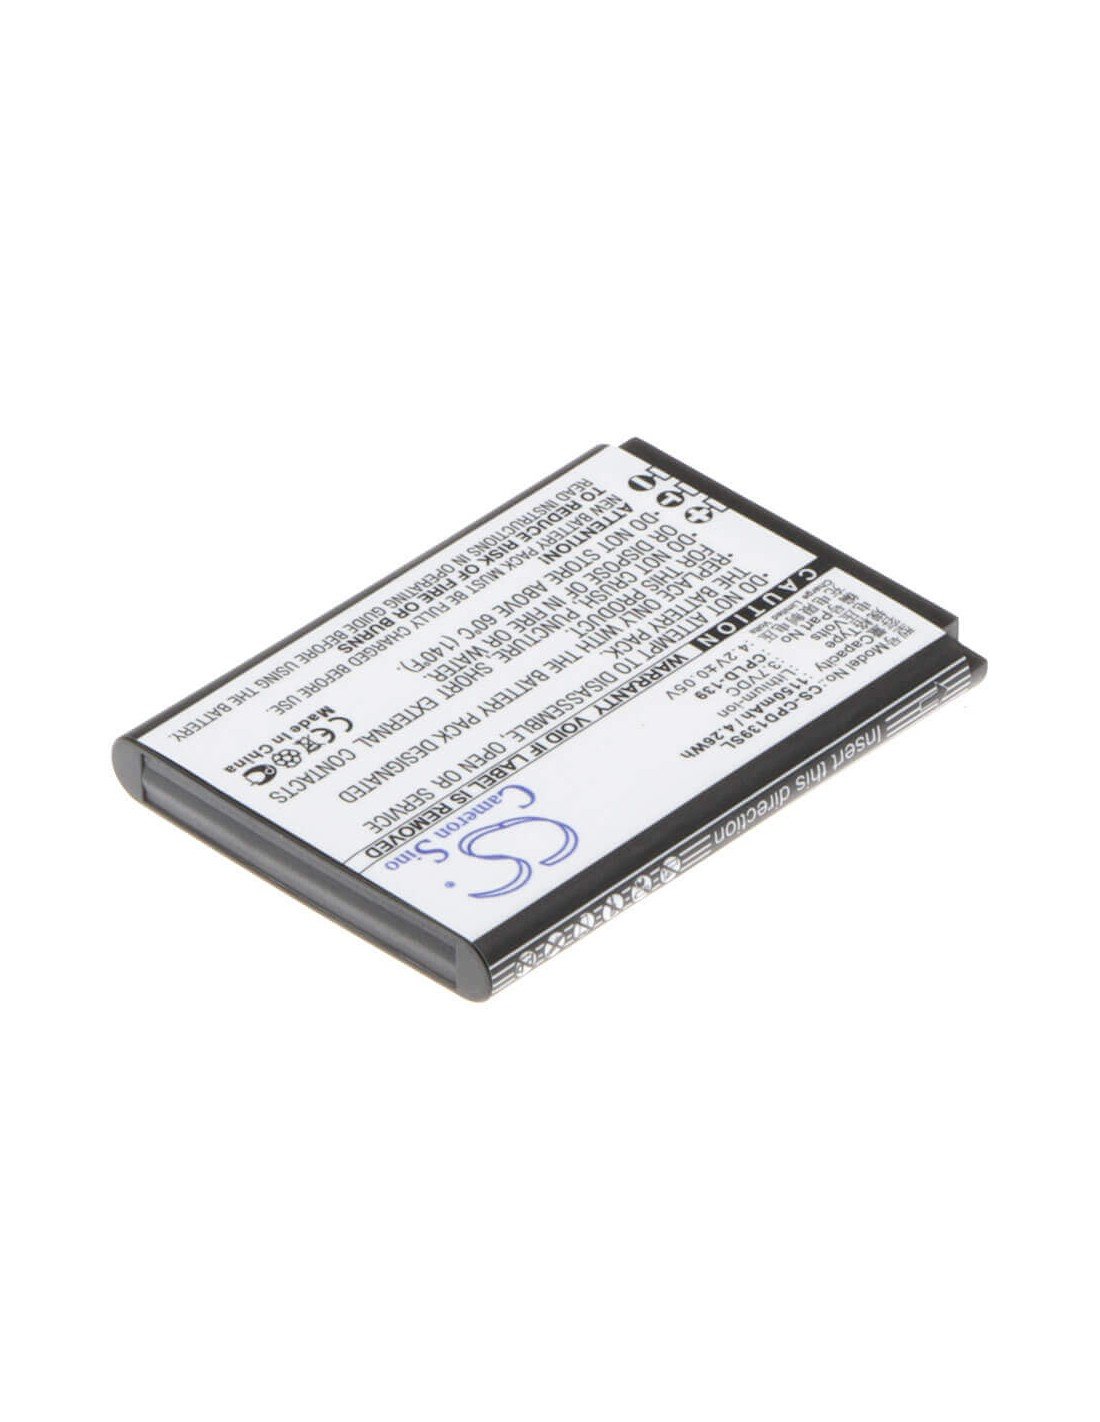 Battery for Coolpad 8021 3.7V, 1150mAh - 4.26Wh